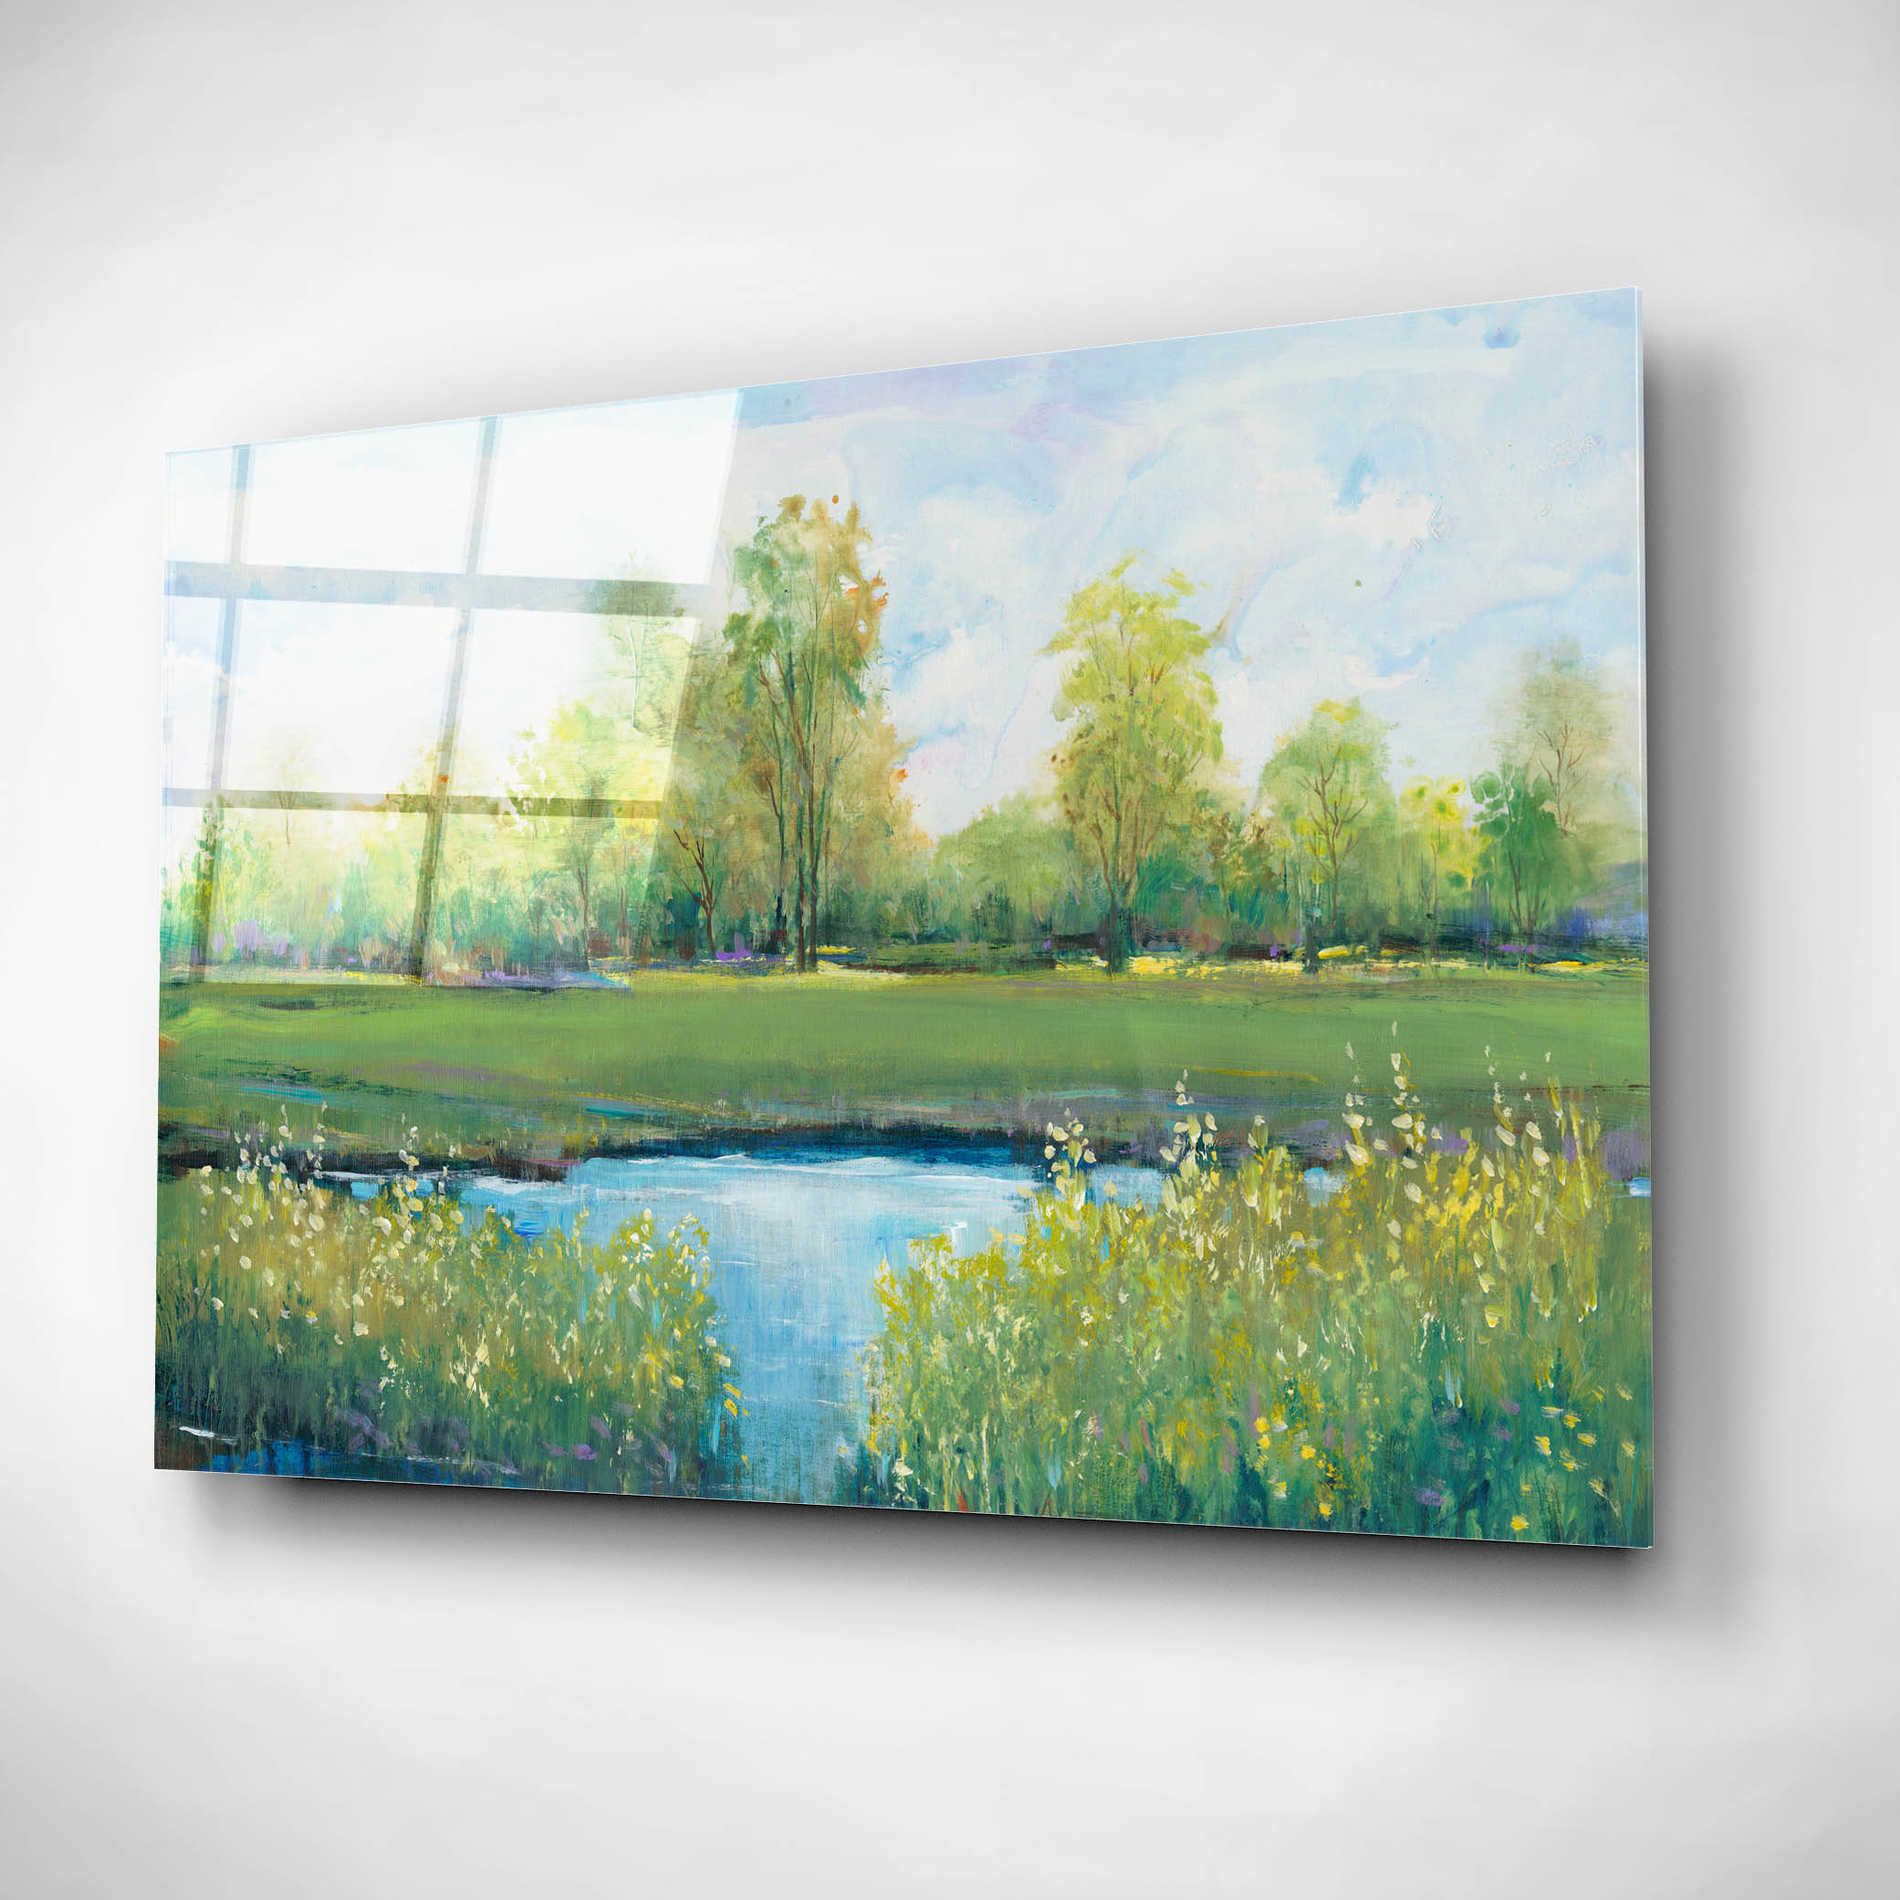 Epic Art 'Tranquil Park II' by Tim O'Toole, Acrylic Glass Wall Art,16x12